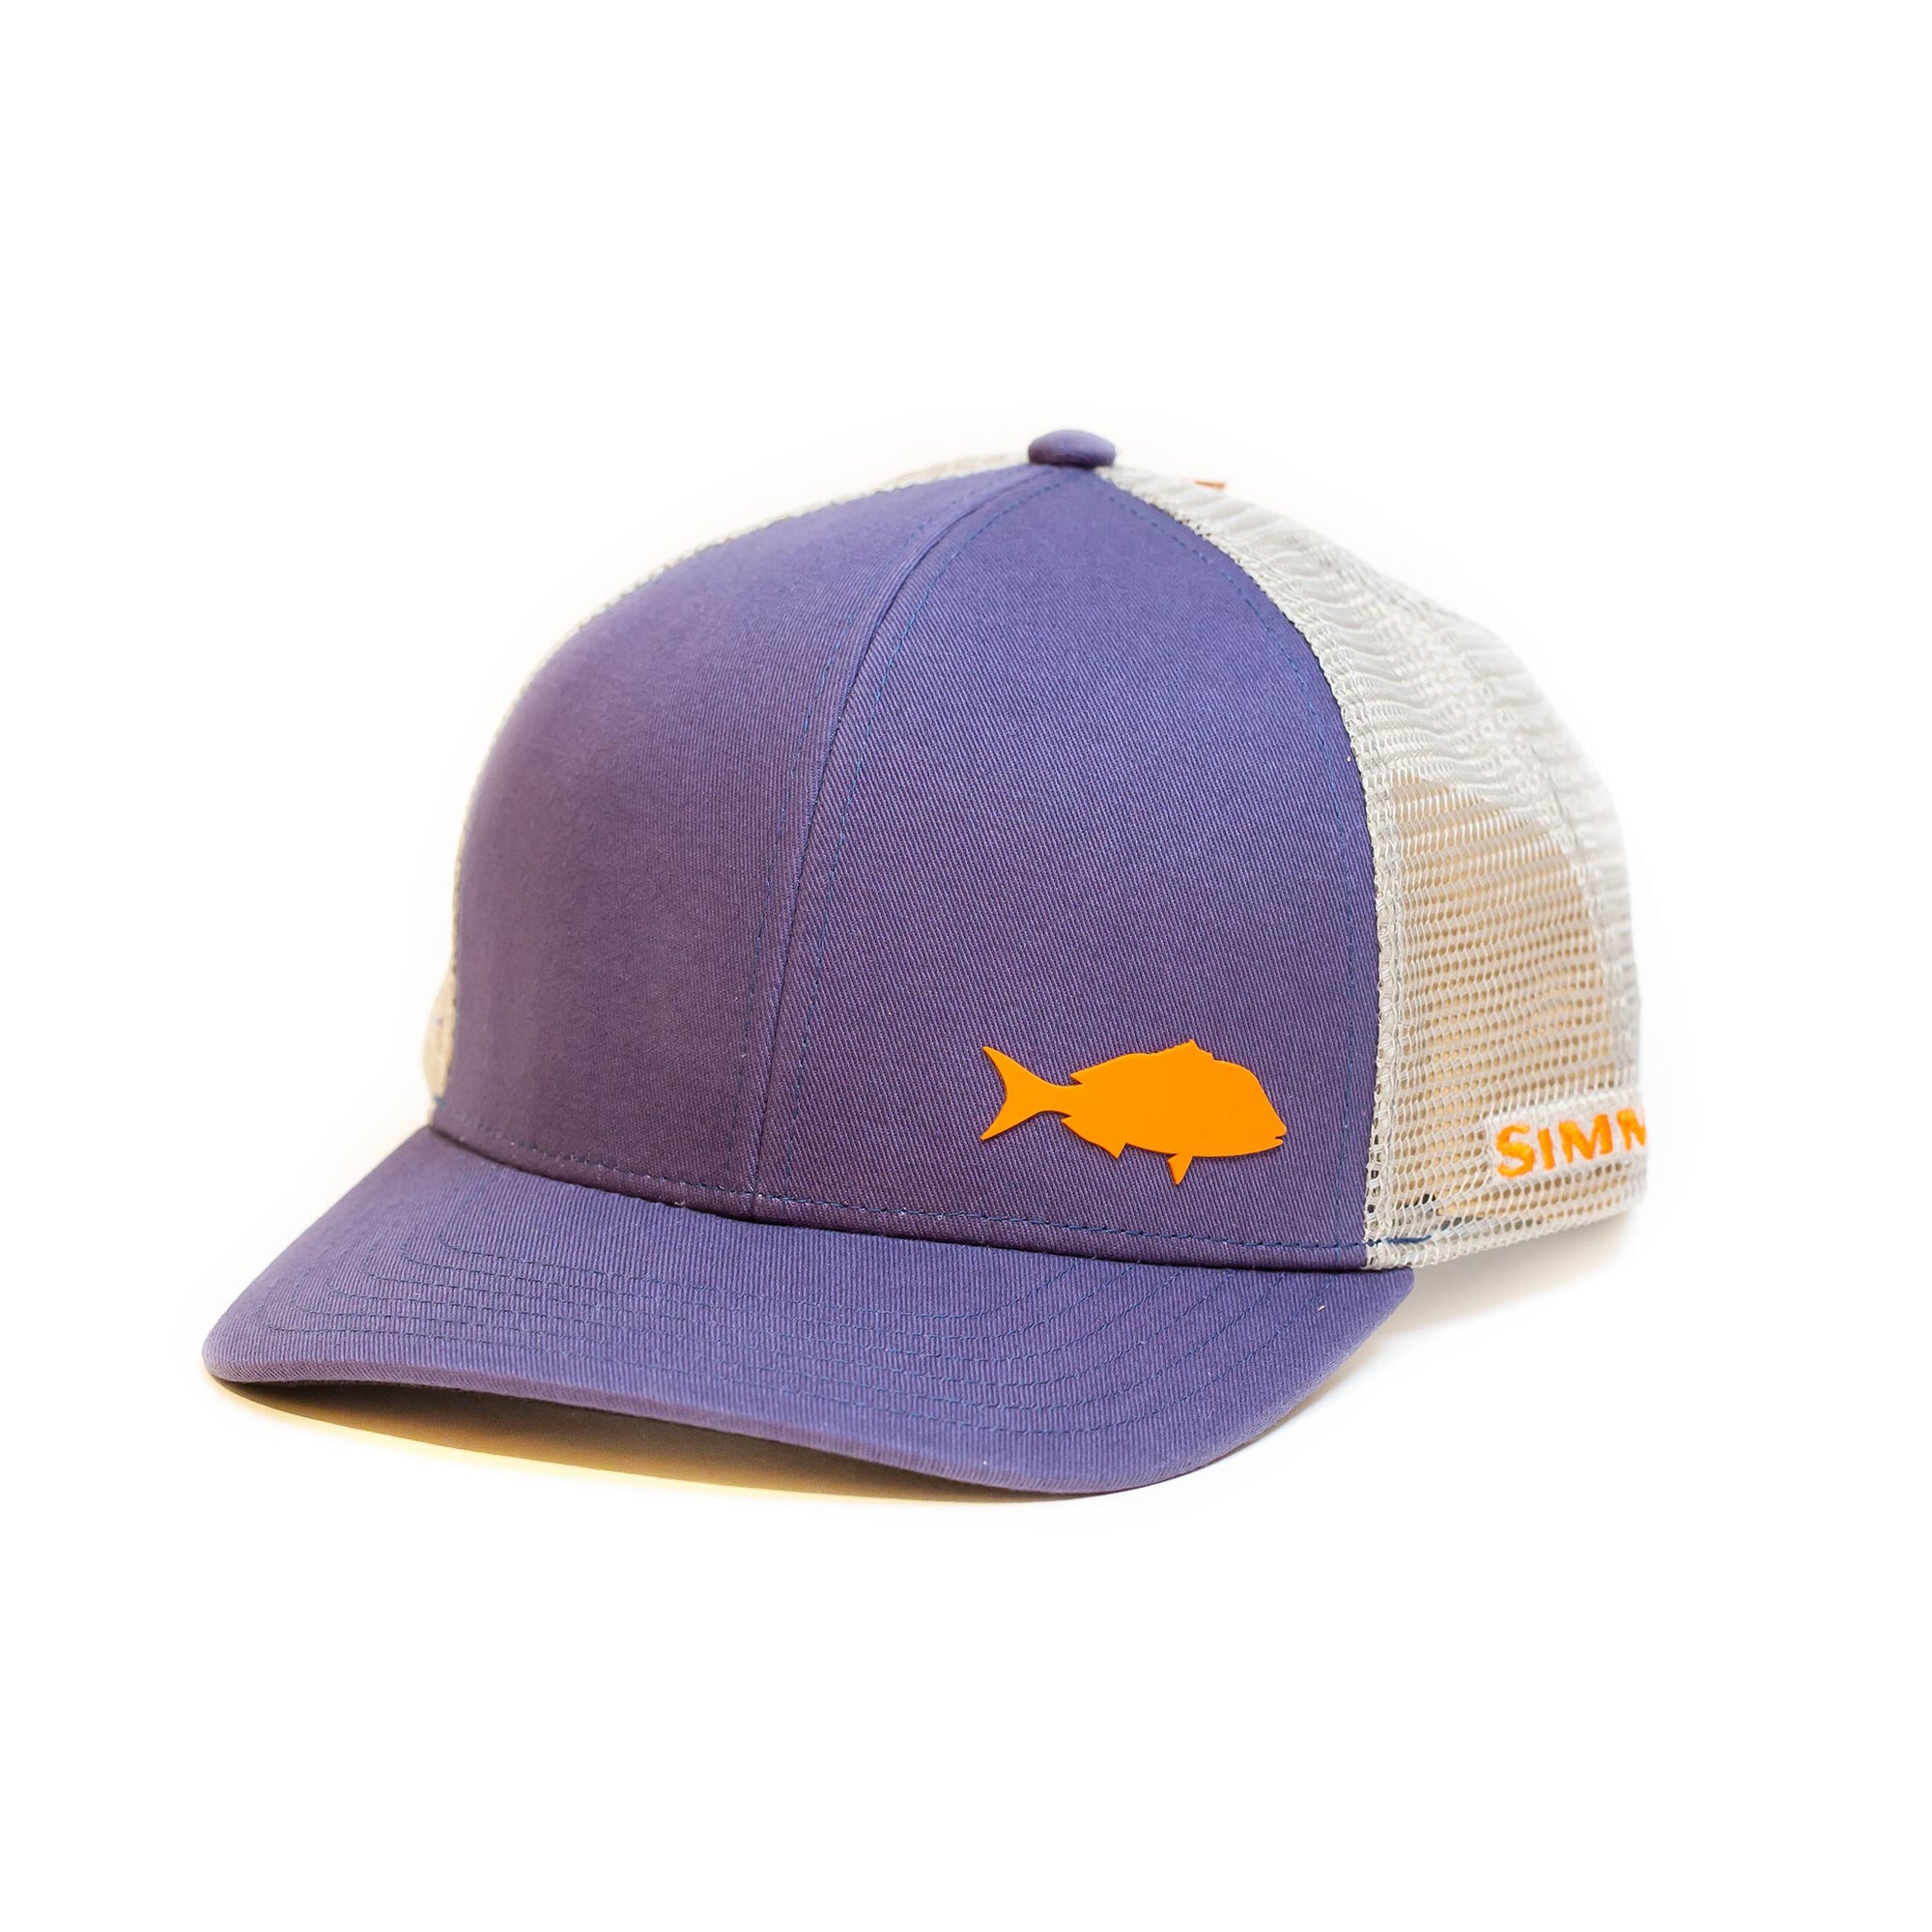 Simms Payoff Trucker Snapper Cap - Compleat Angler Nedlands